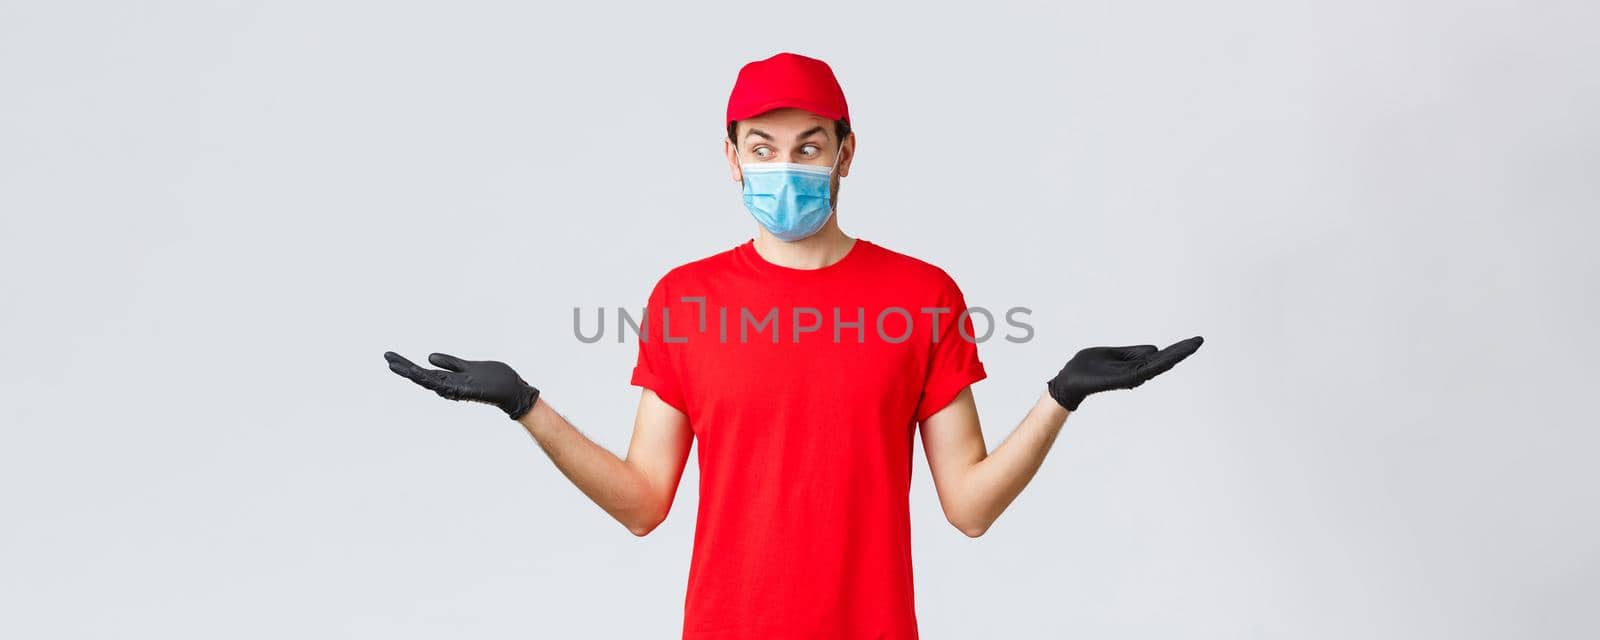 Groceries and packages delivery, covid-19, quarantine and shopping concept. Surprised courier in red cap and t-shirt uniform, wear protective face mask, gloves, hold two items in hands sideways.